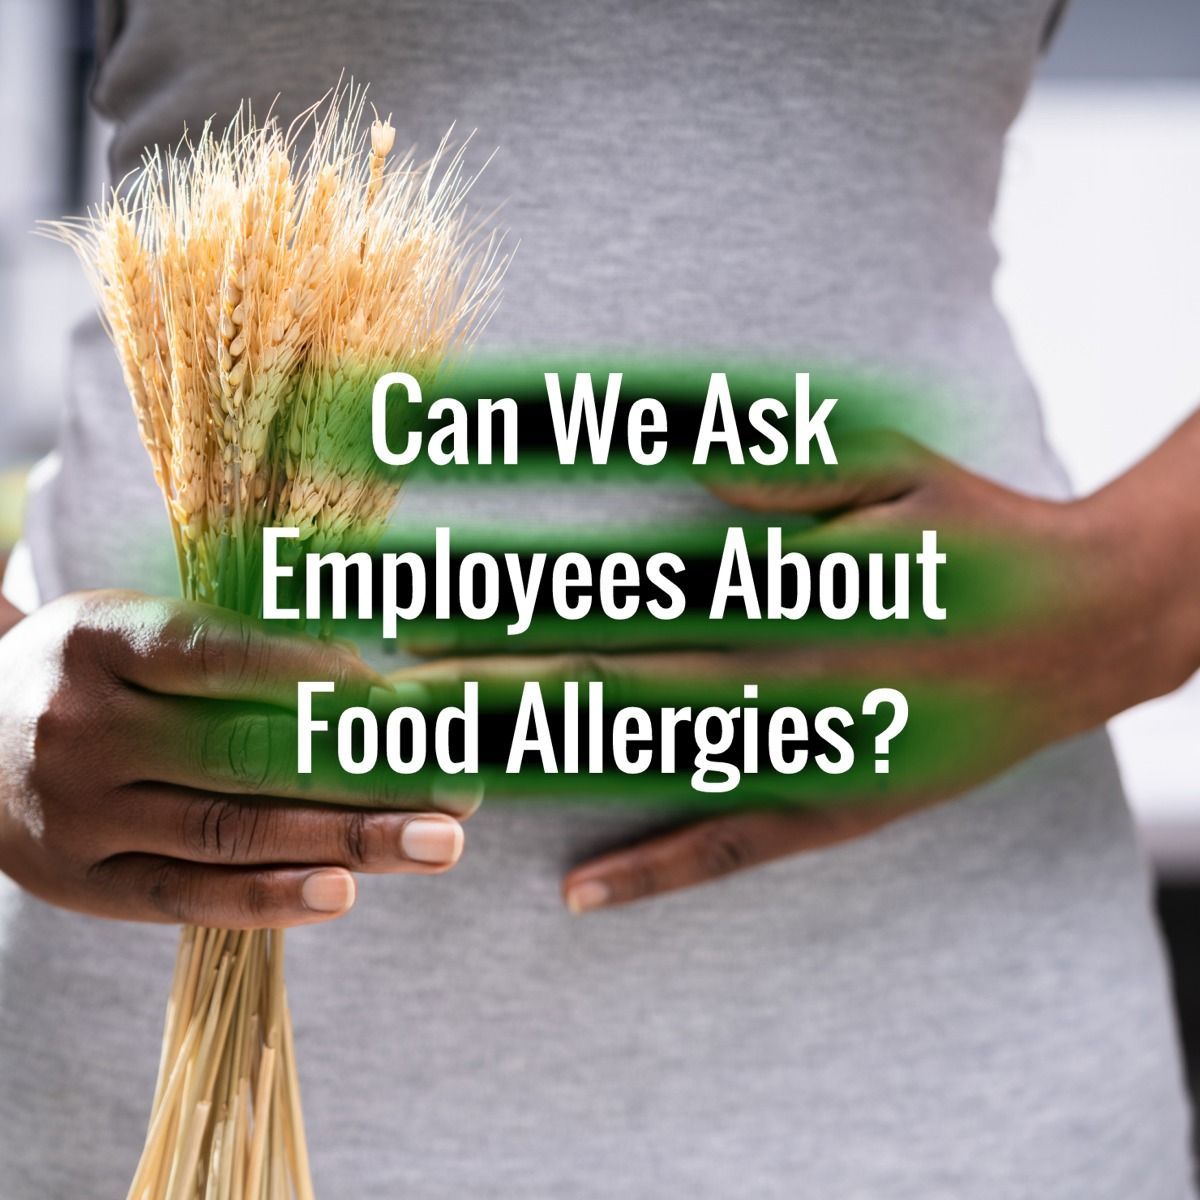 Can We Ask Employees About Food Allergies?